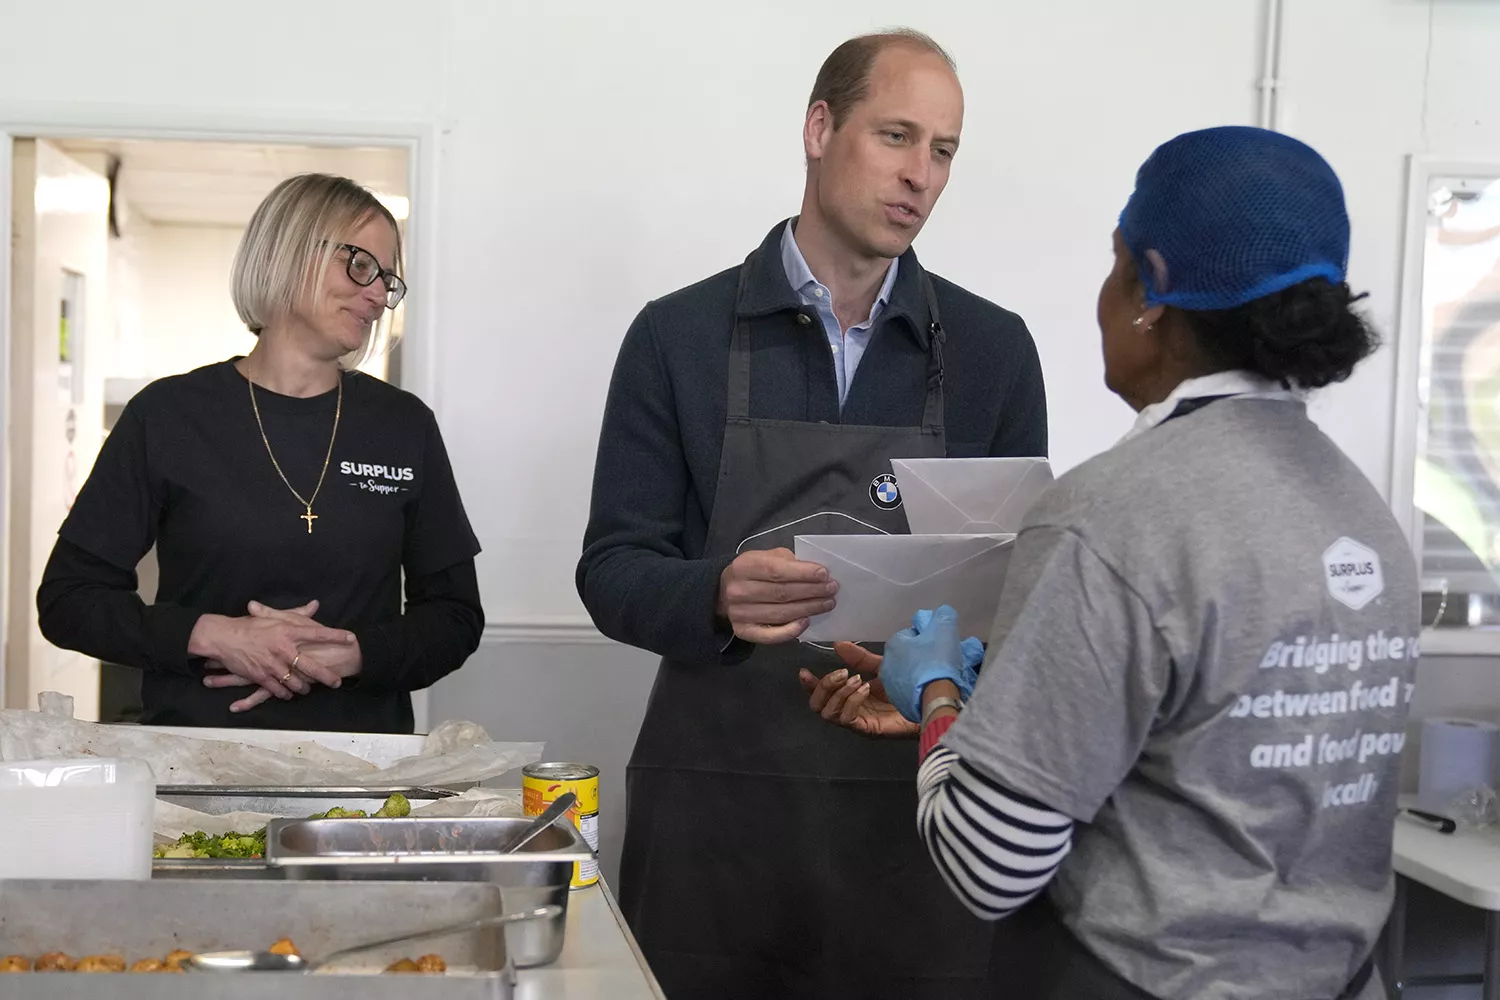 Prince William vows to care for Kate Middleton during her cancer treatment